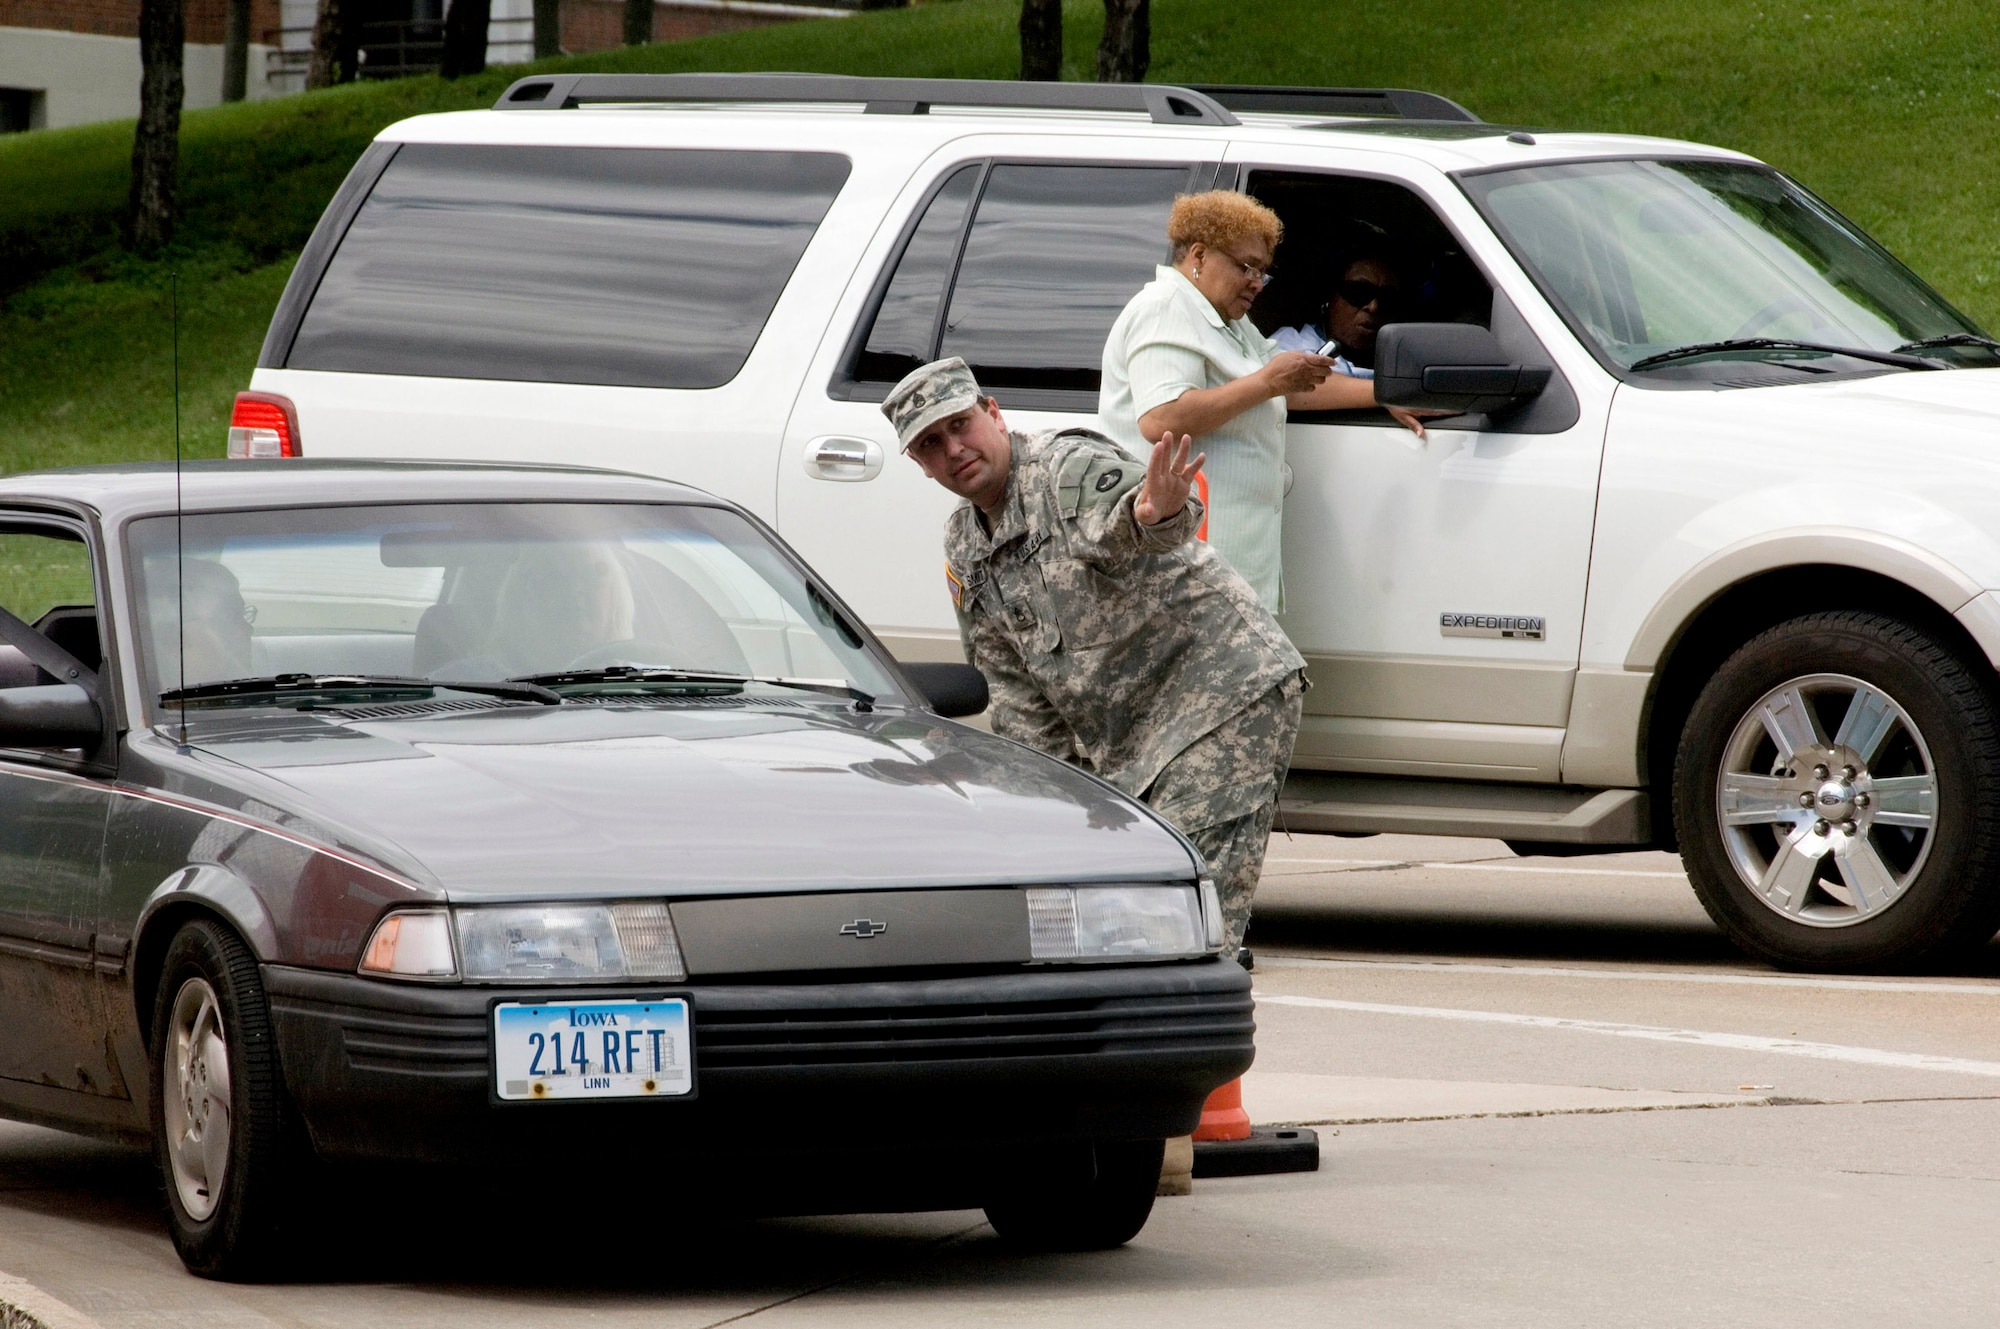 Staff Sgt. David Smith gives detour directions to a resident trying to return home after massive flooding in Cedar Rapids, Iowa. Sergeant Smith is a Guardsman with the Headquarters and Headquarters Company 2 Brigade Combat Team. He is from Boone, Iowa, and was activated to help with recovery efforts in Cedar Rapids, Iowa. (U.S. Air Force photo/Master Sgt. Jack Braden) 